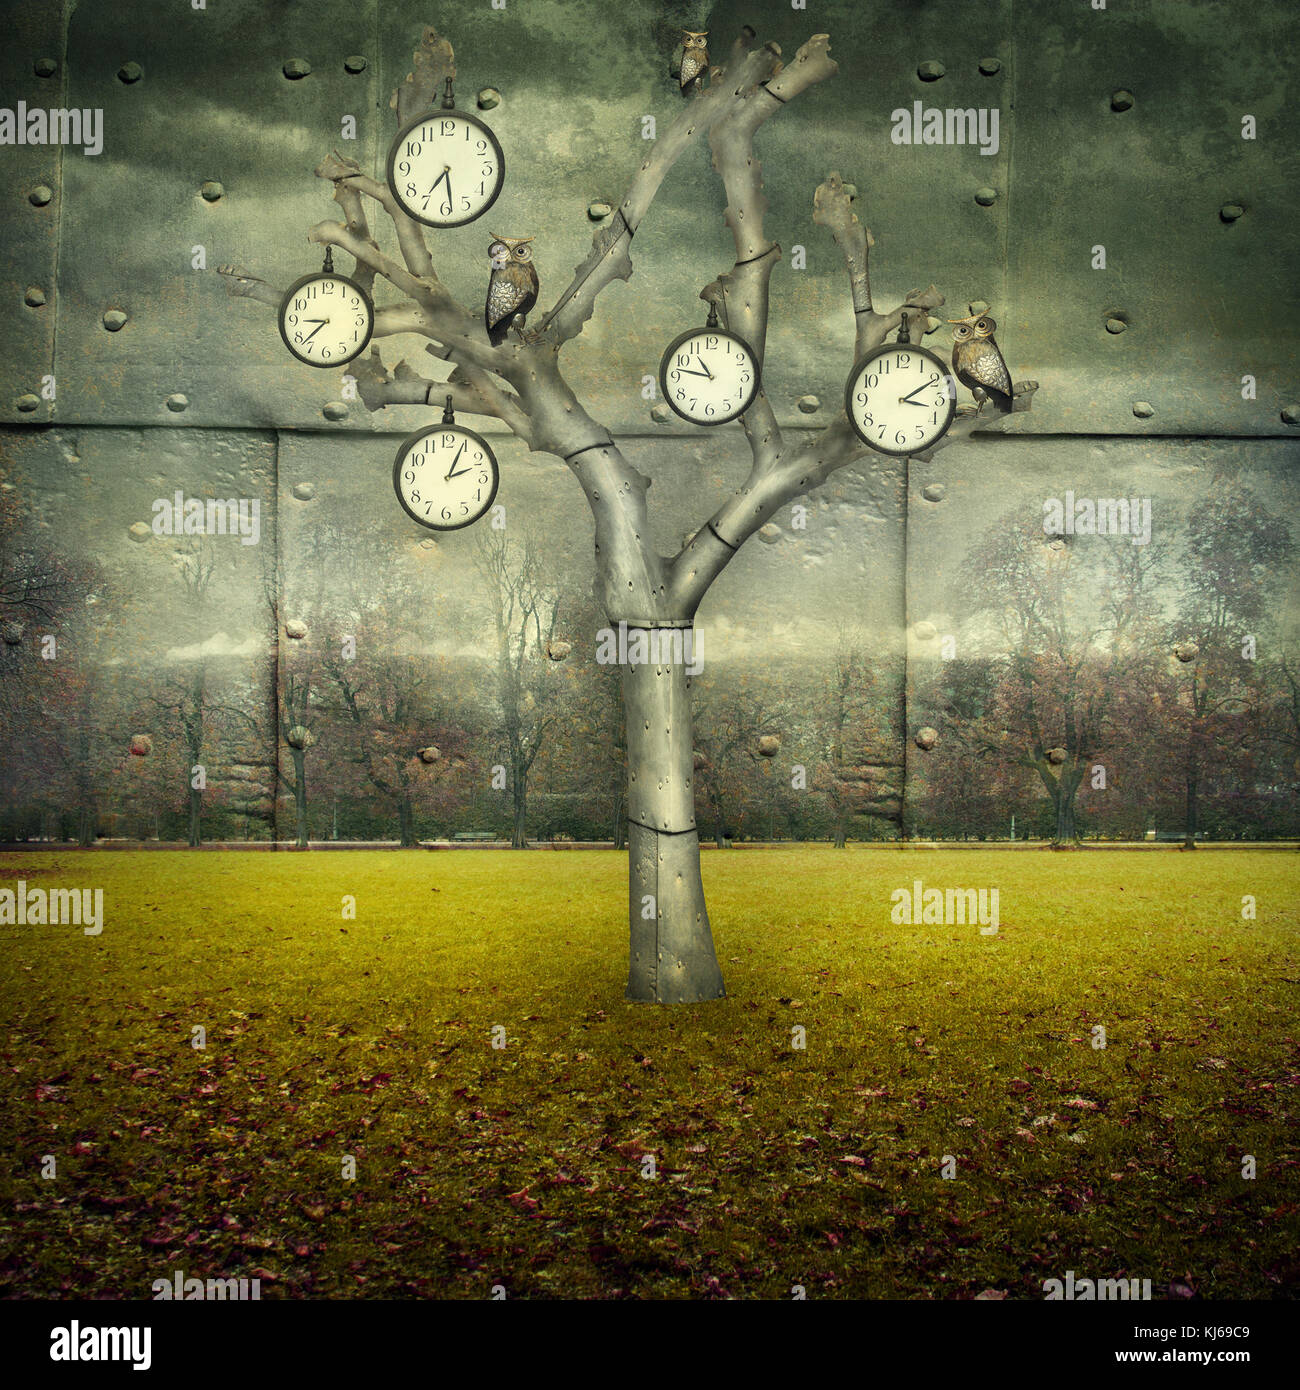 Surreal illustration of many clock and small mechanical owls on a tree and scattered in a mechanic landscape Stock Photo